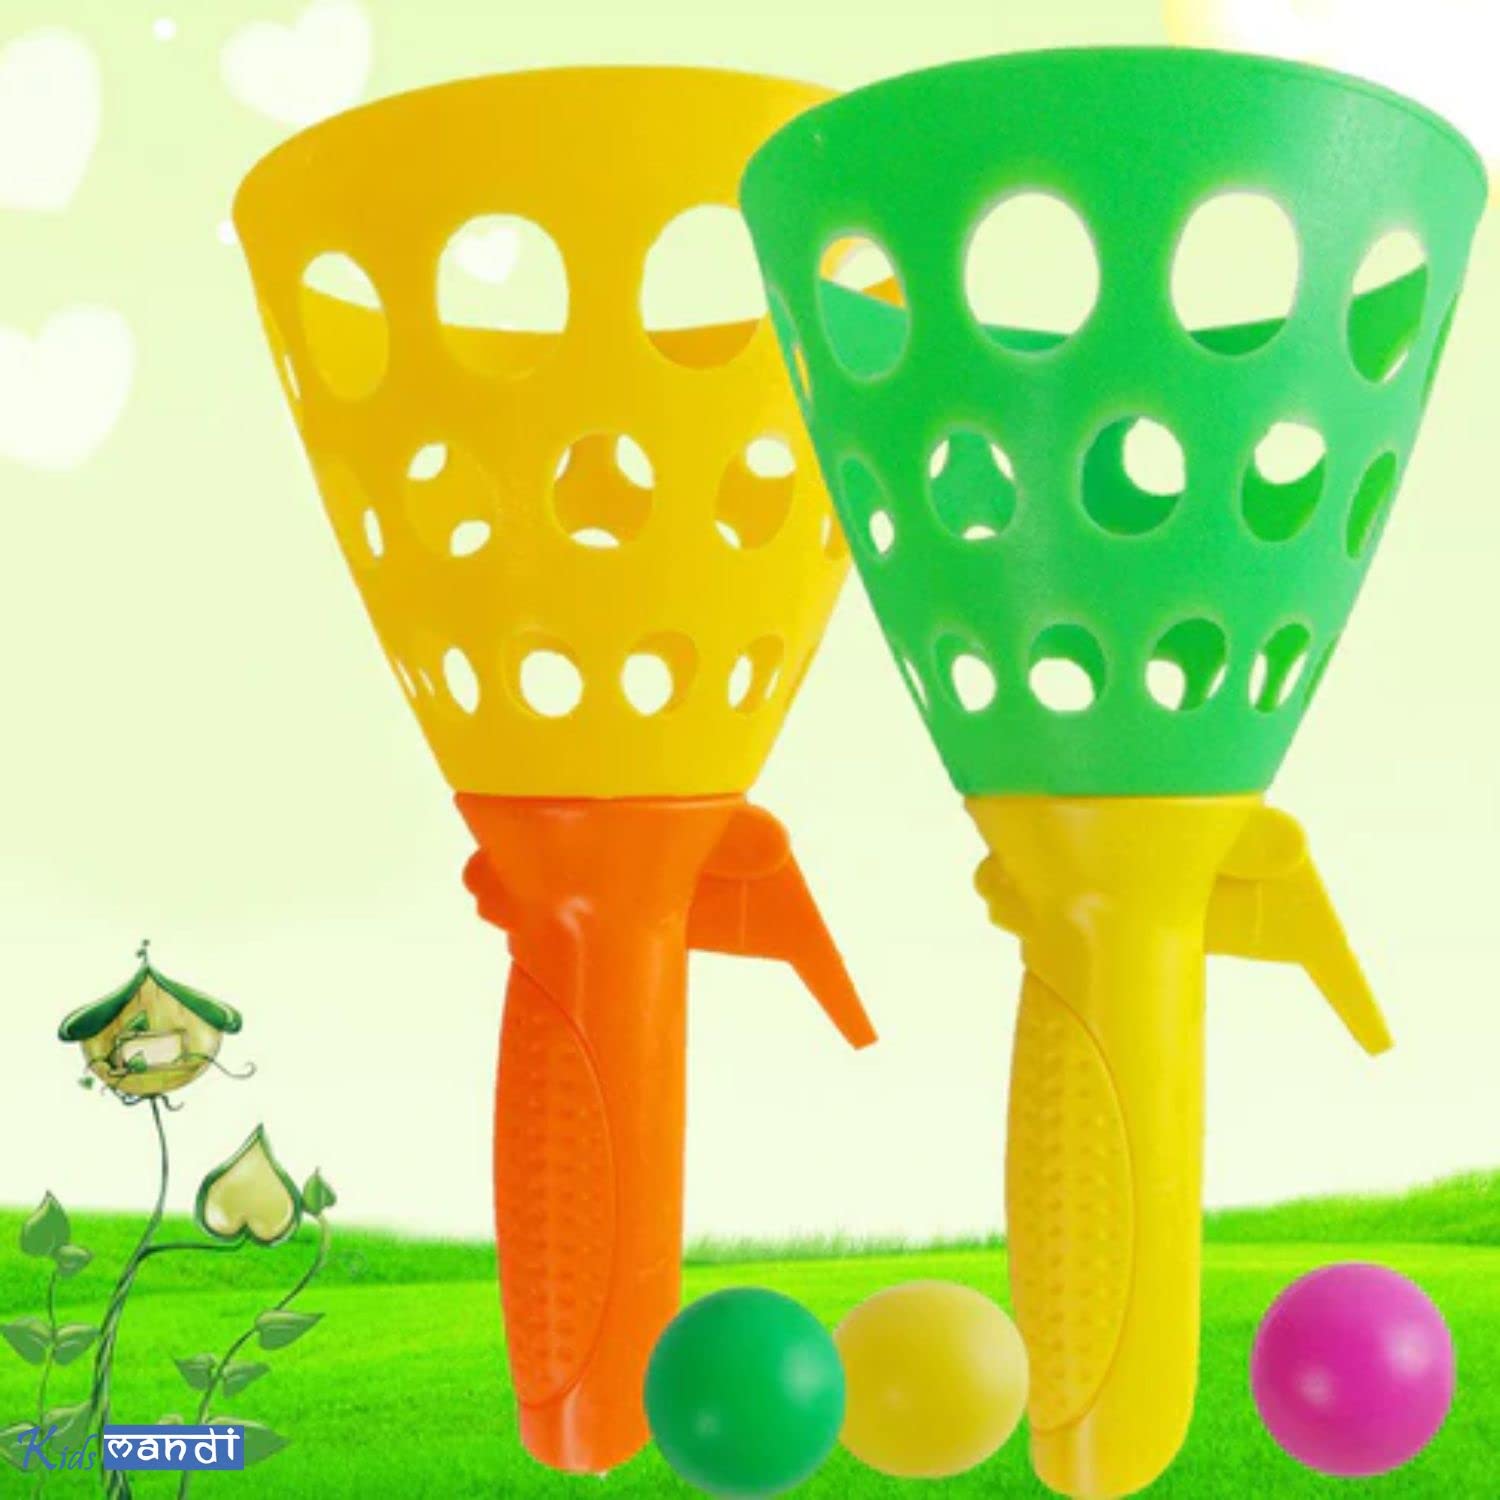 Kids Mandi double butt catapult ball for outdoor sports.